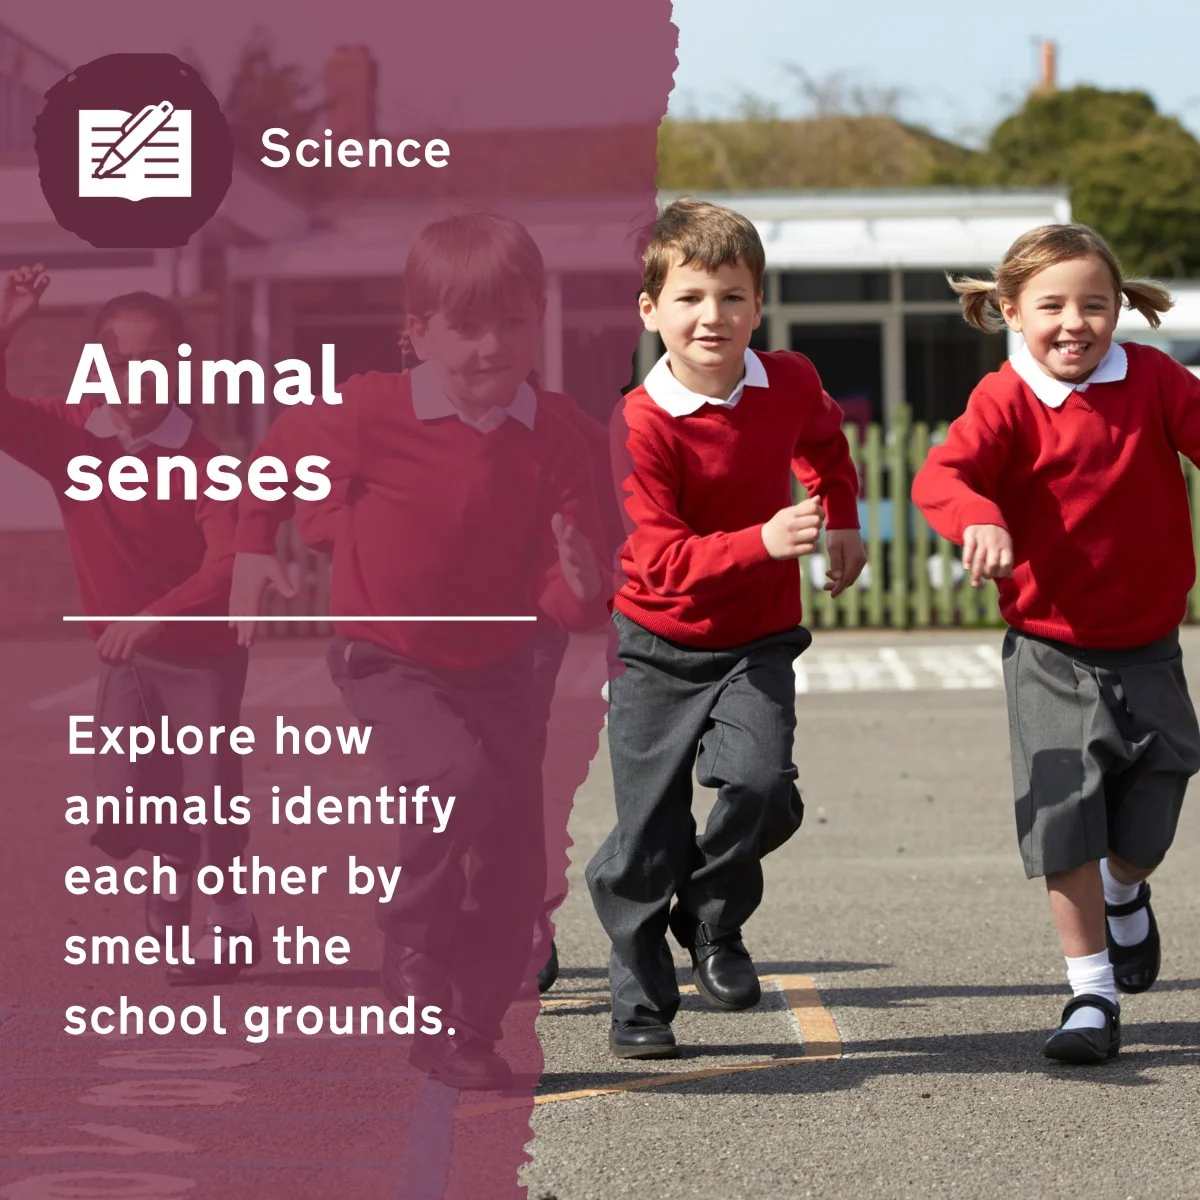 Use this primary science activity to explore how animals use their sense of smell to identify each other. This fun outdoor lesson idea will encourage pupils to think about how external factors can also impact animals and force them to adapt.